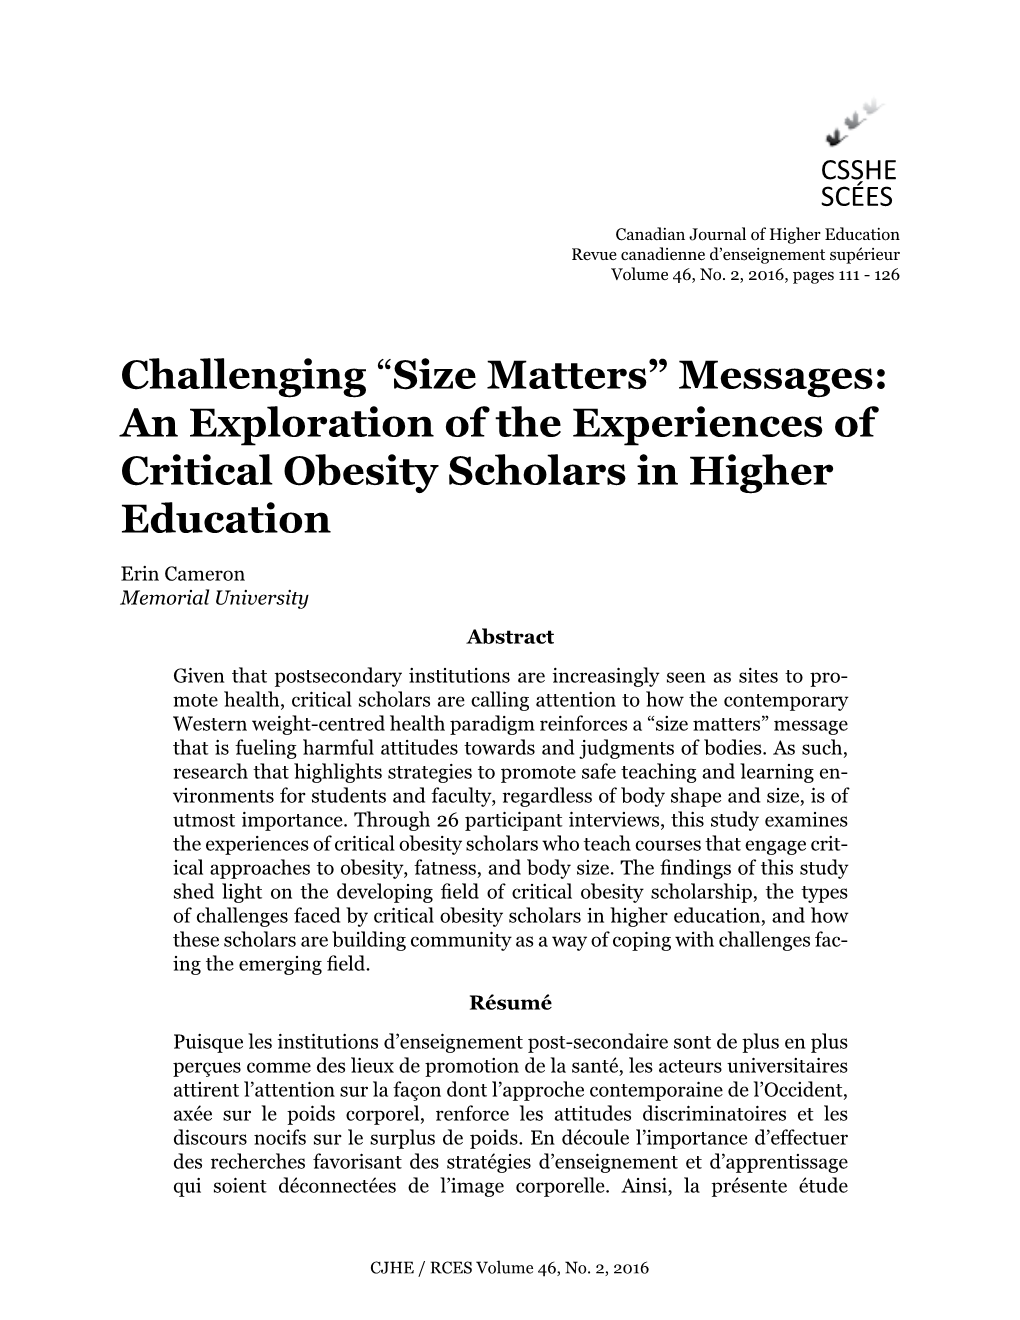 An Exploration of the Experiences of Critical Obesity Scholars in Higher Education